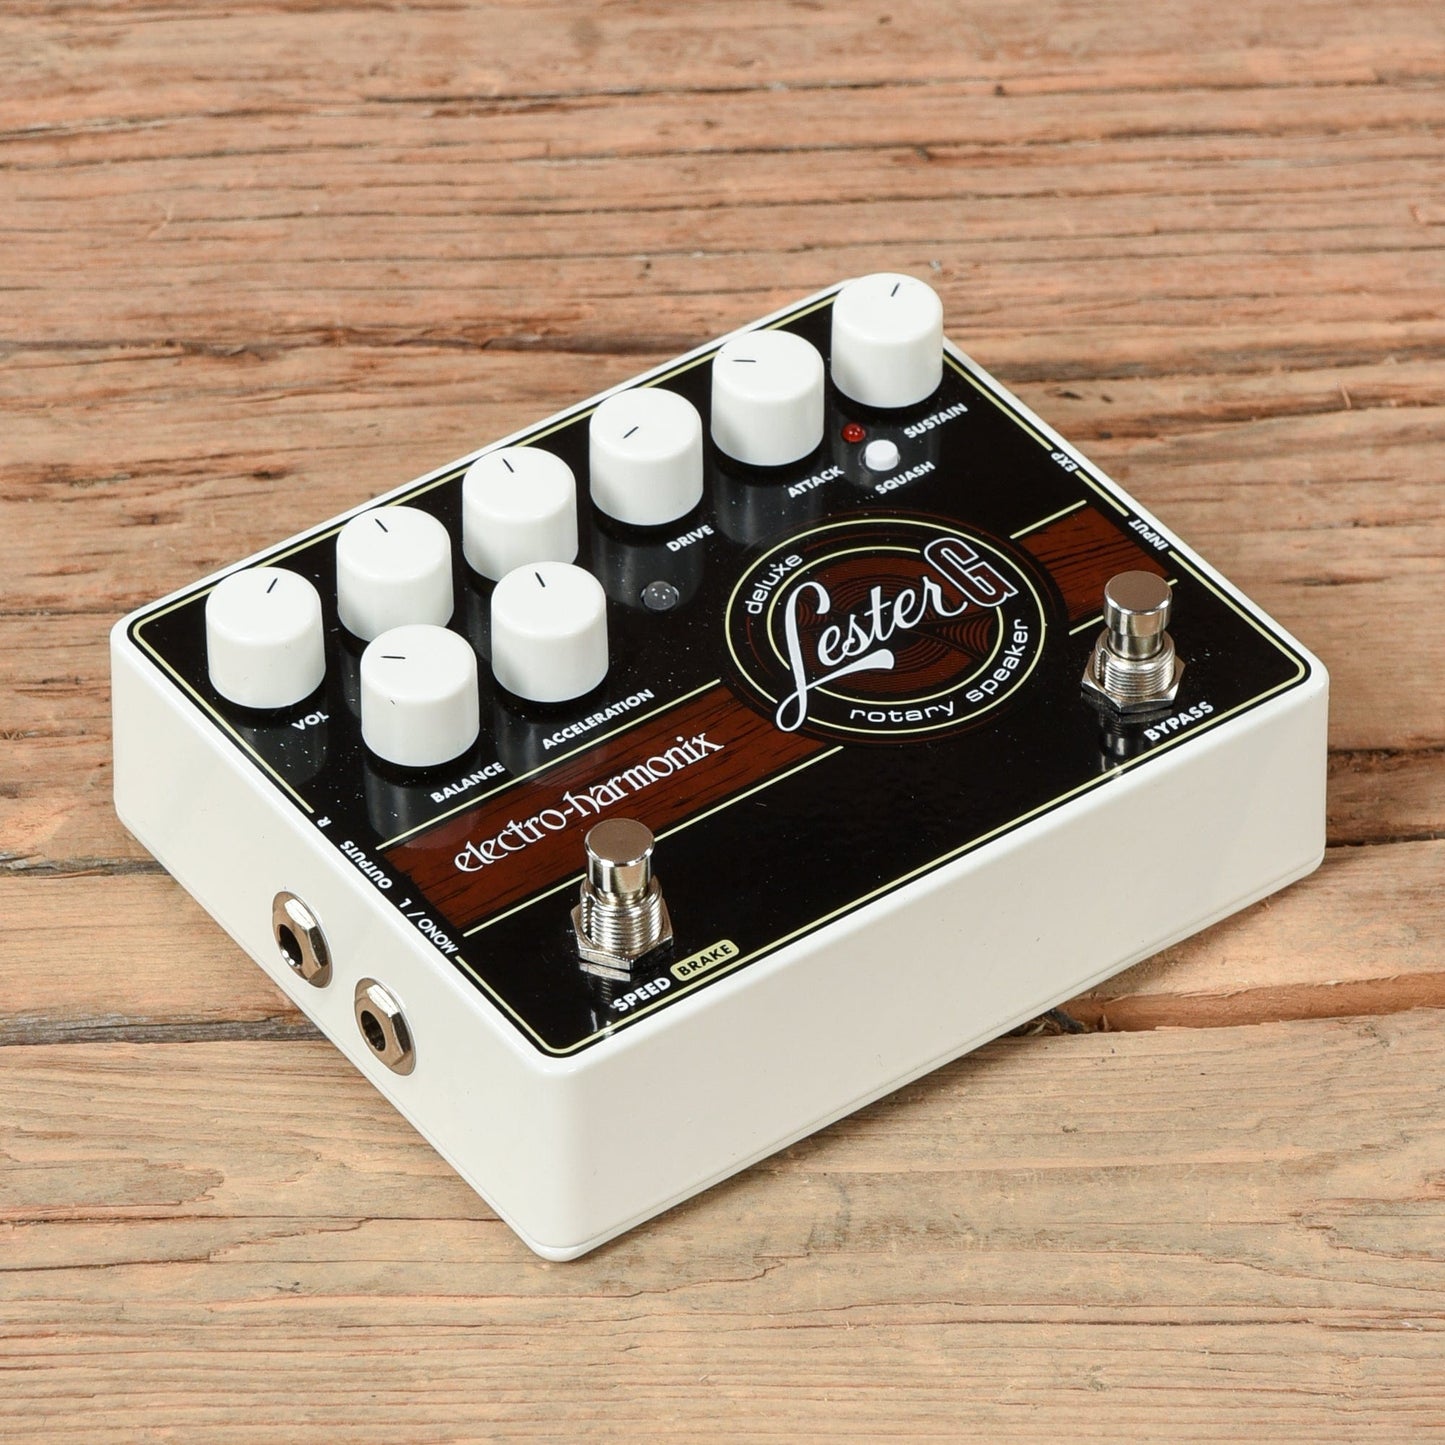 Electro-Harmonix Lester G Effects and Pedals / Amp Modeling